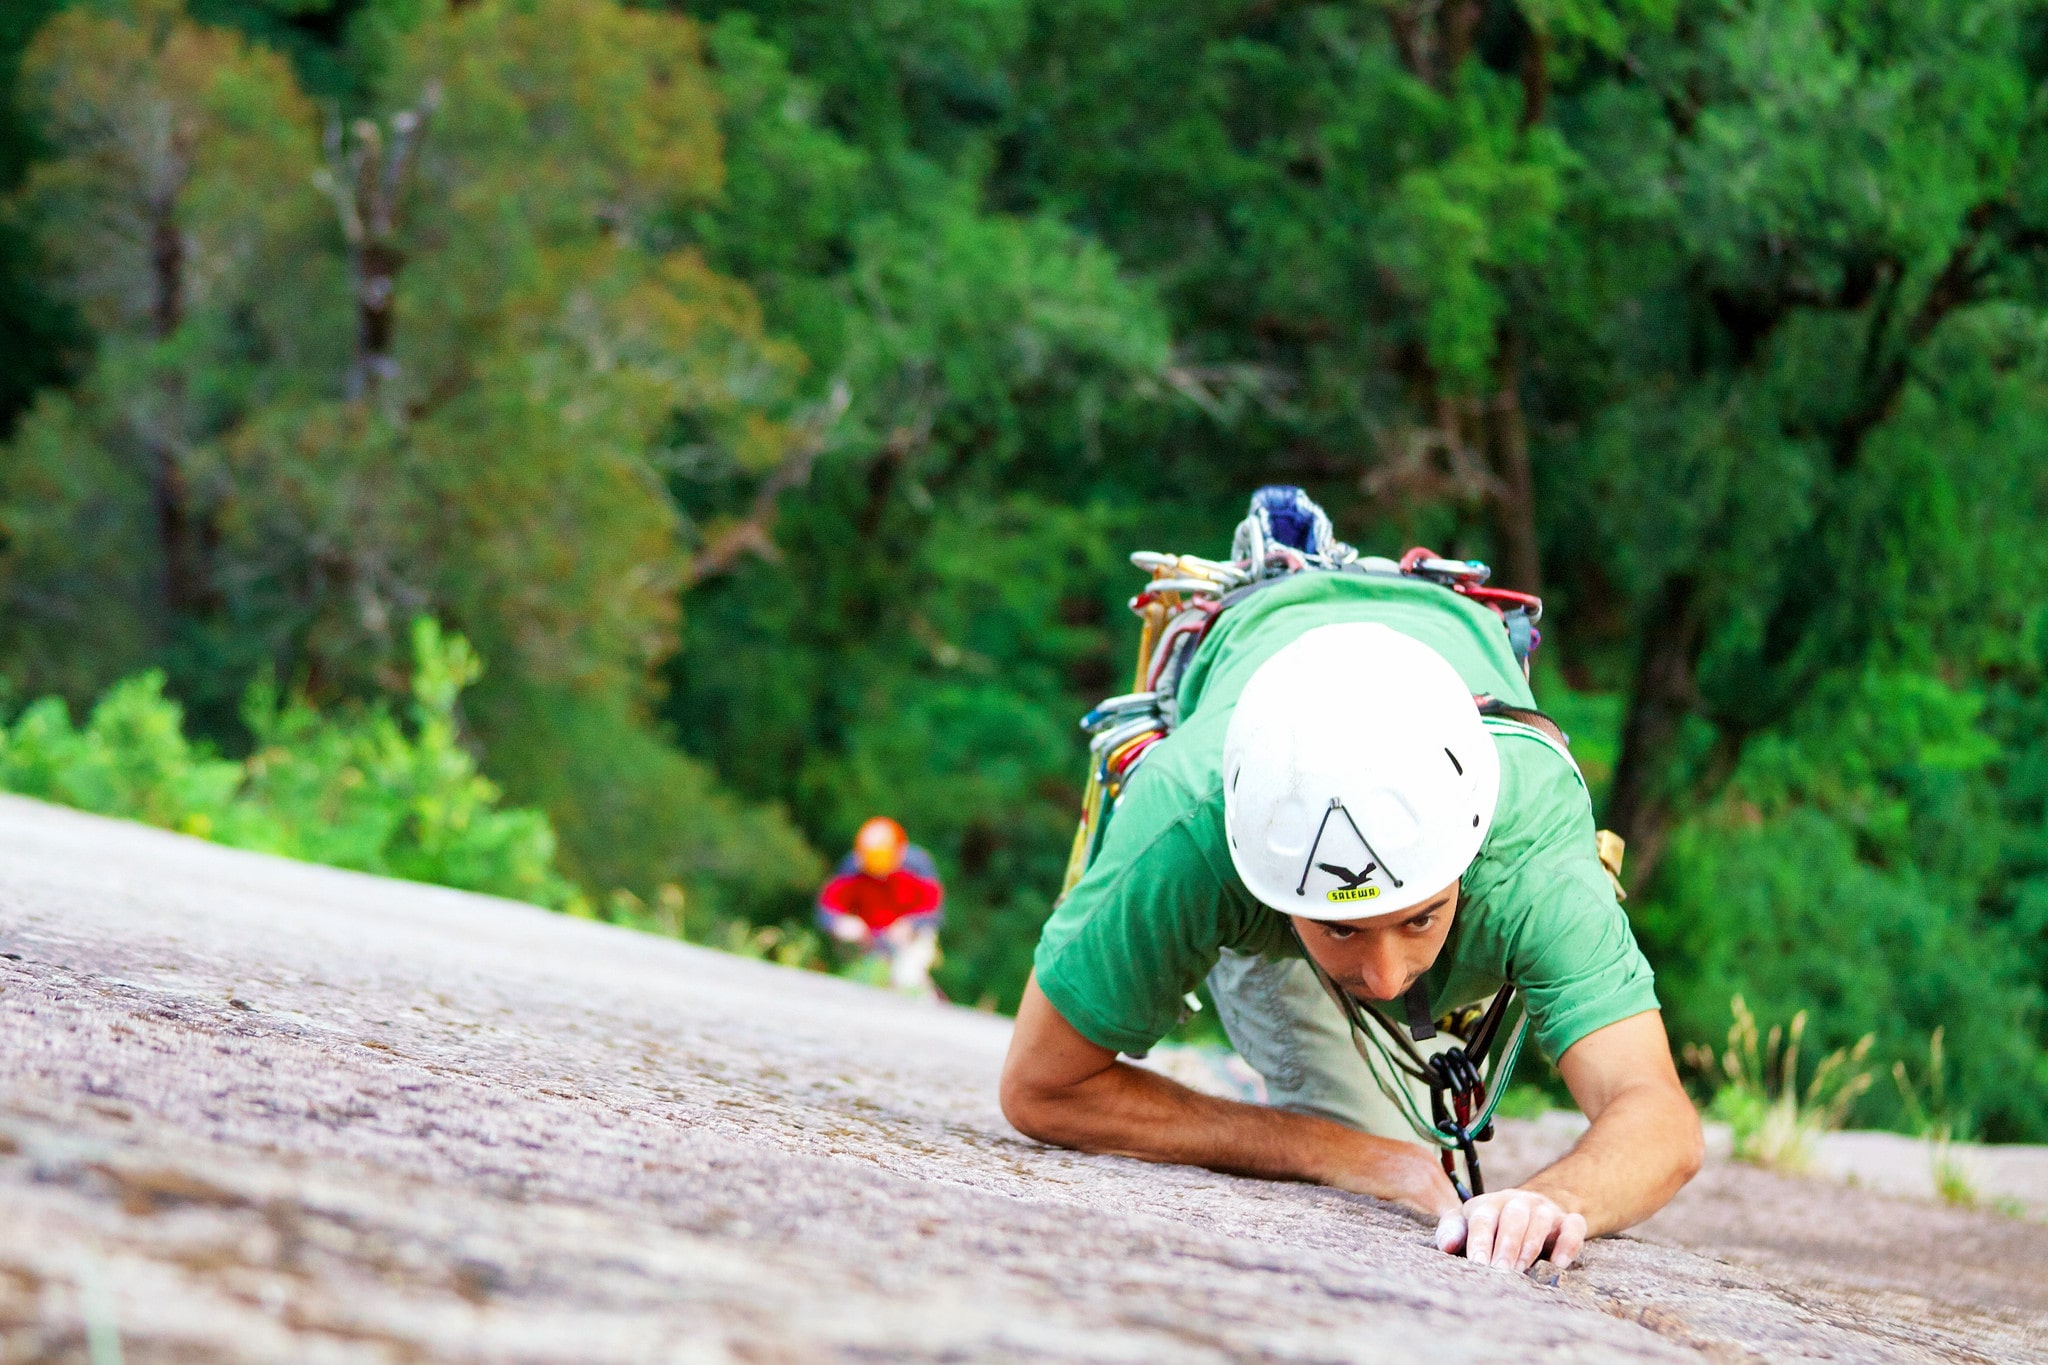 Will You Be My Trad Guru?: The Importance of Apprenticing in the Gym Climbing Era